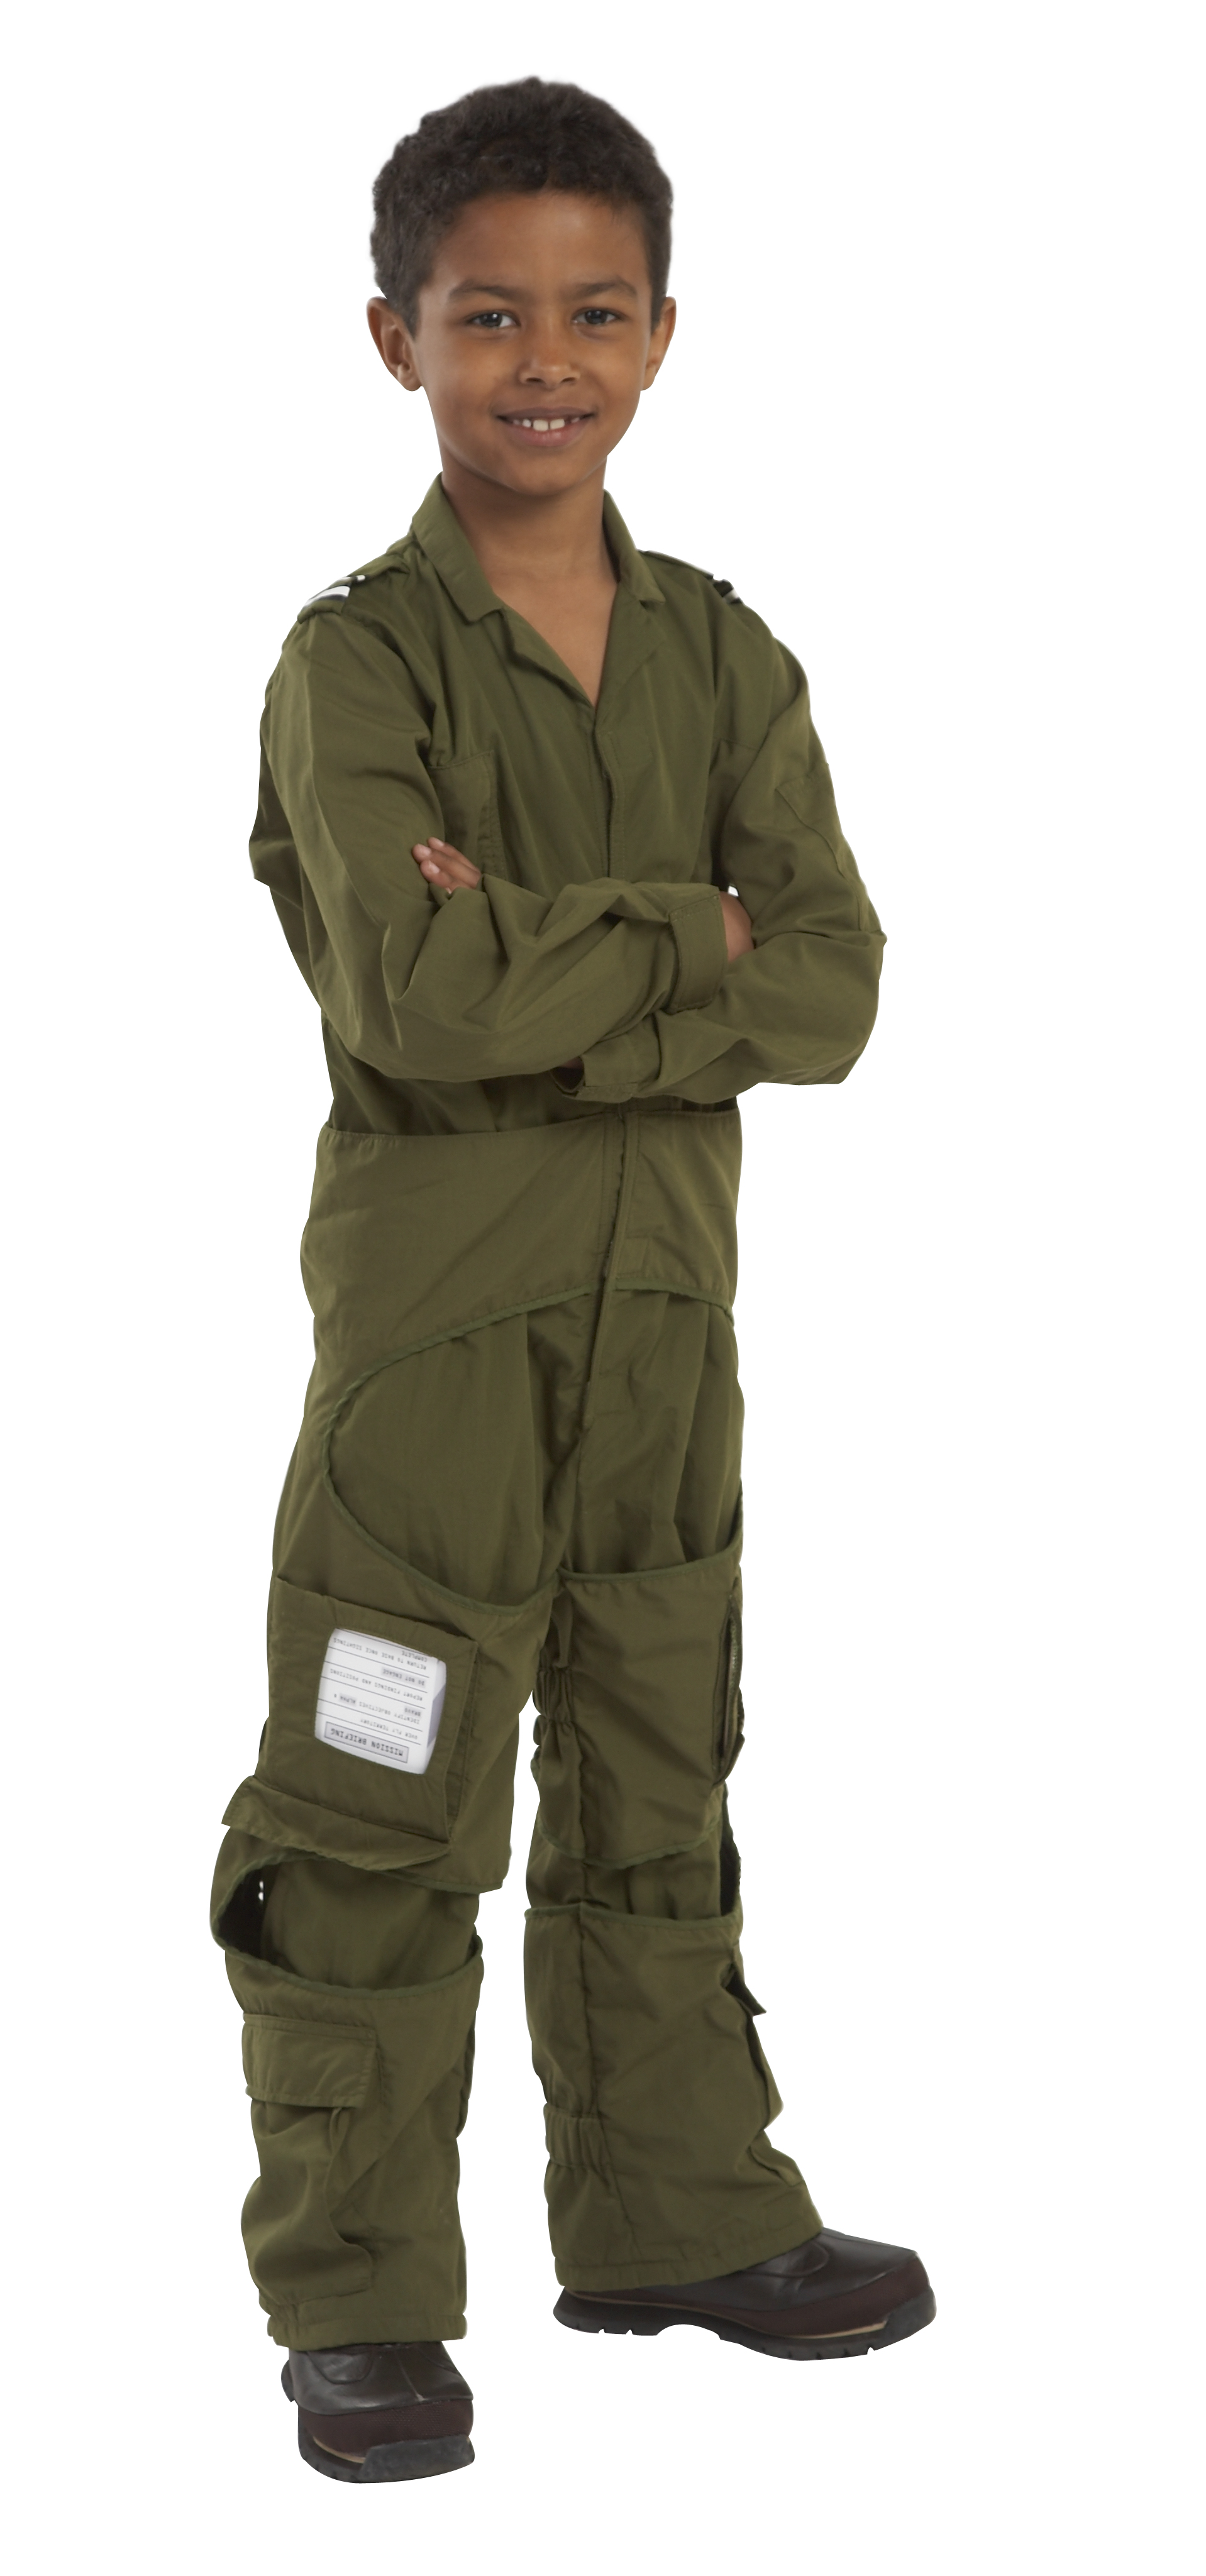 HM Armed Forces Raf Fast Jet Pilot Outfit